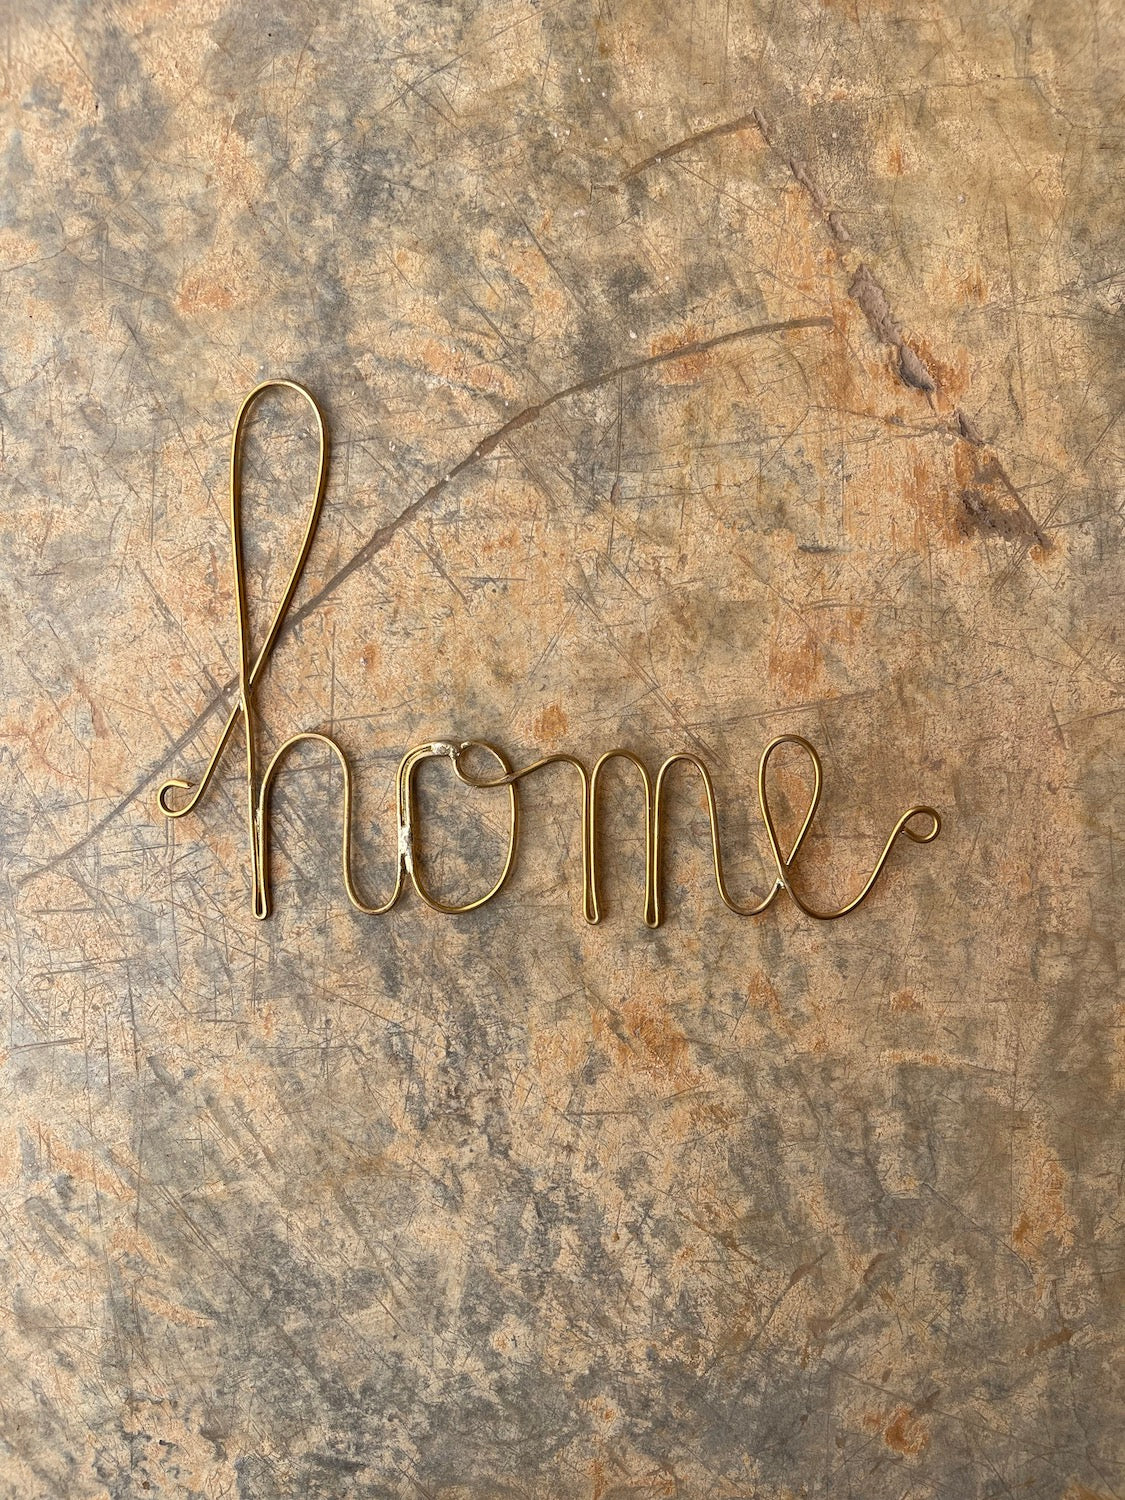 Moroccan Brass Wall Decor "Home" Metal Wall Ornament Decor Une Vie Nomade Brand_Une Vie Nomade Home_Decor New Arrivals IMG_1838MoroccanBrassMetalWallOrnamentCursiveHome